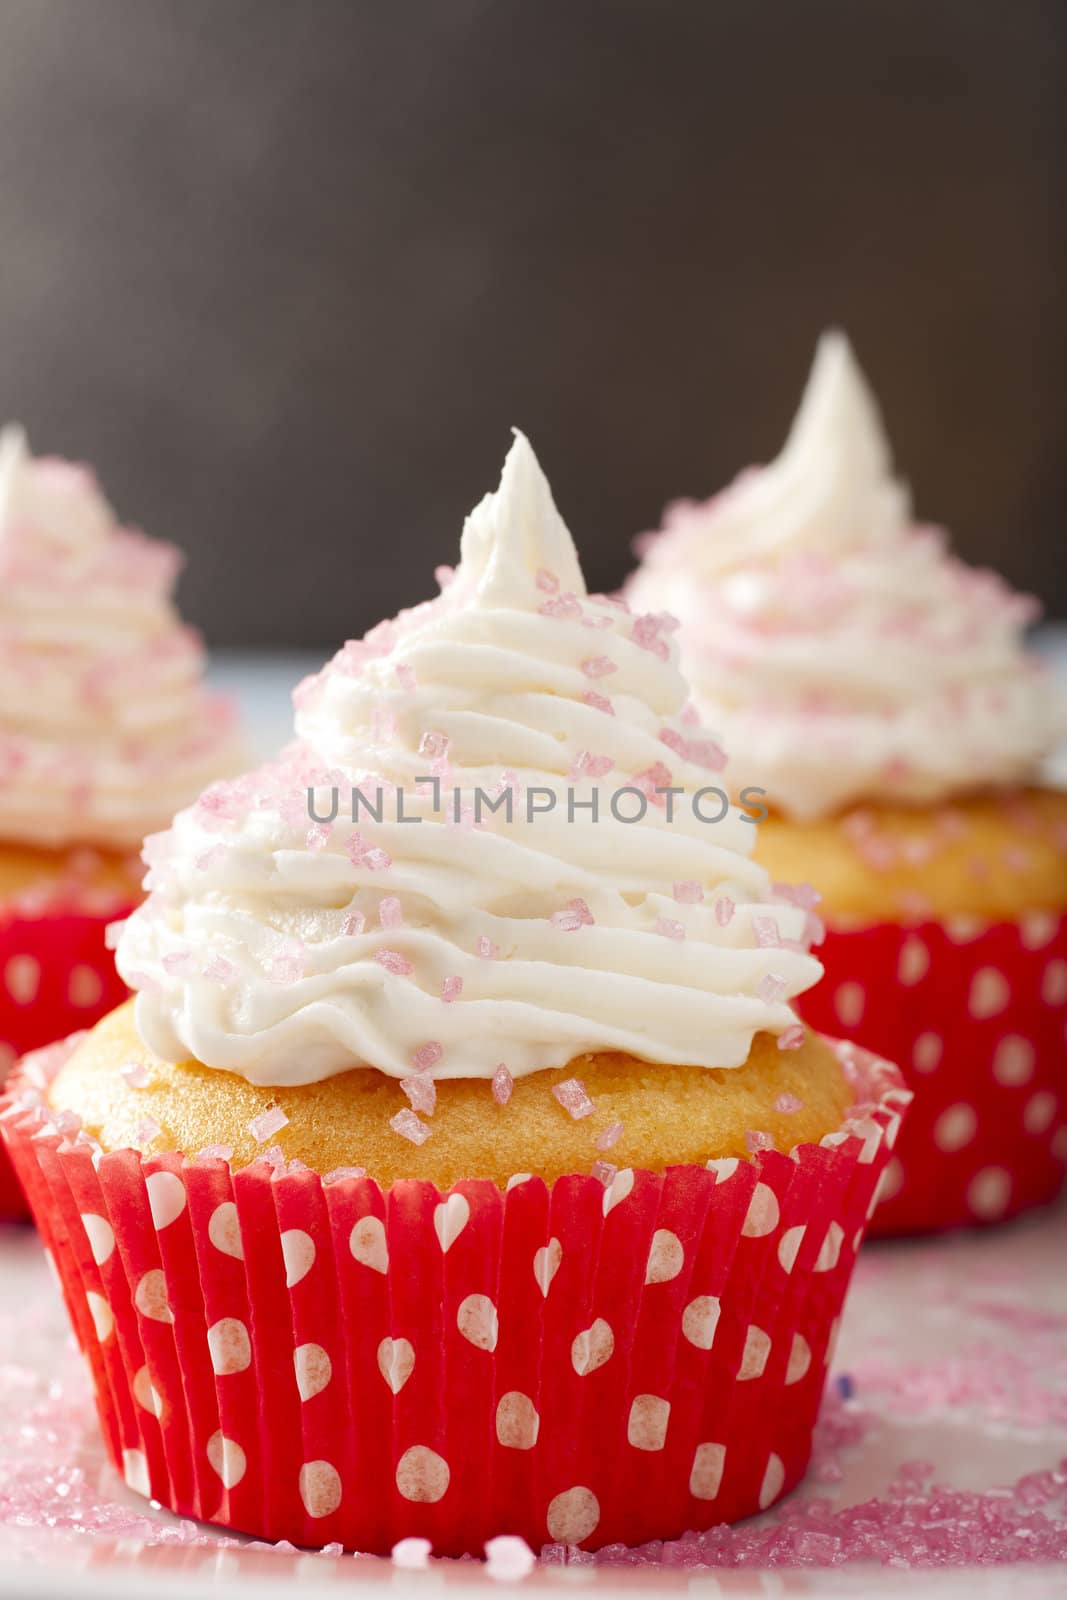 Yellow cupcake in red and white polka dot cupcake paper topped with white frosting